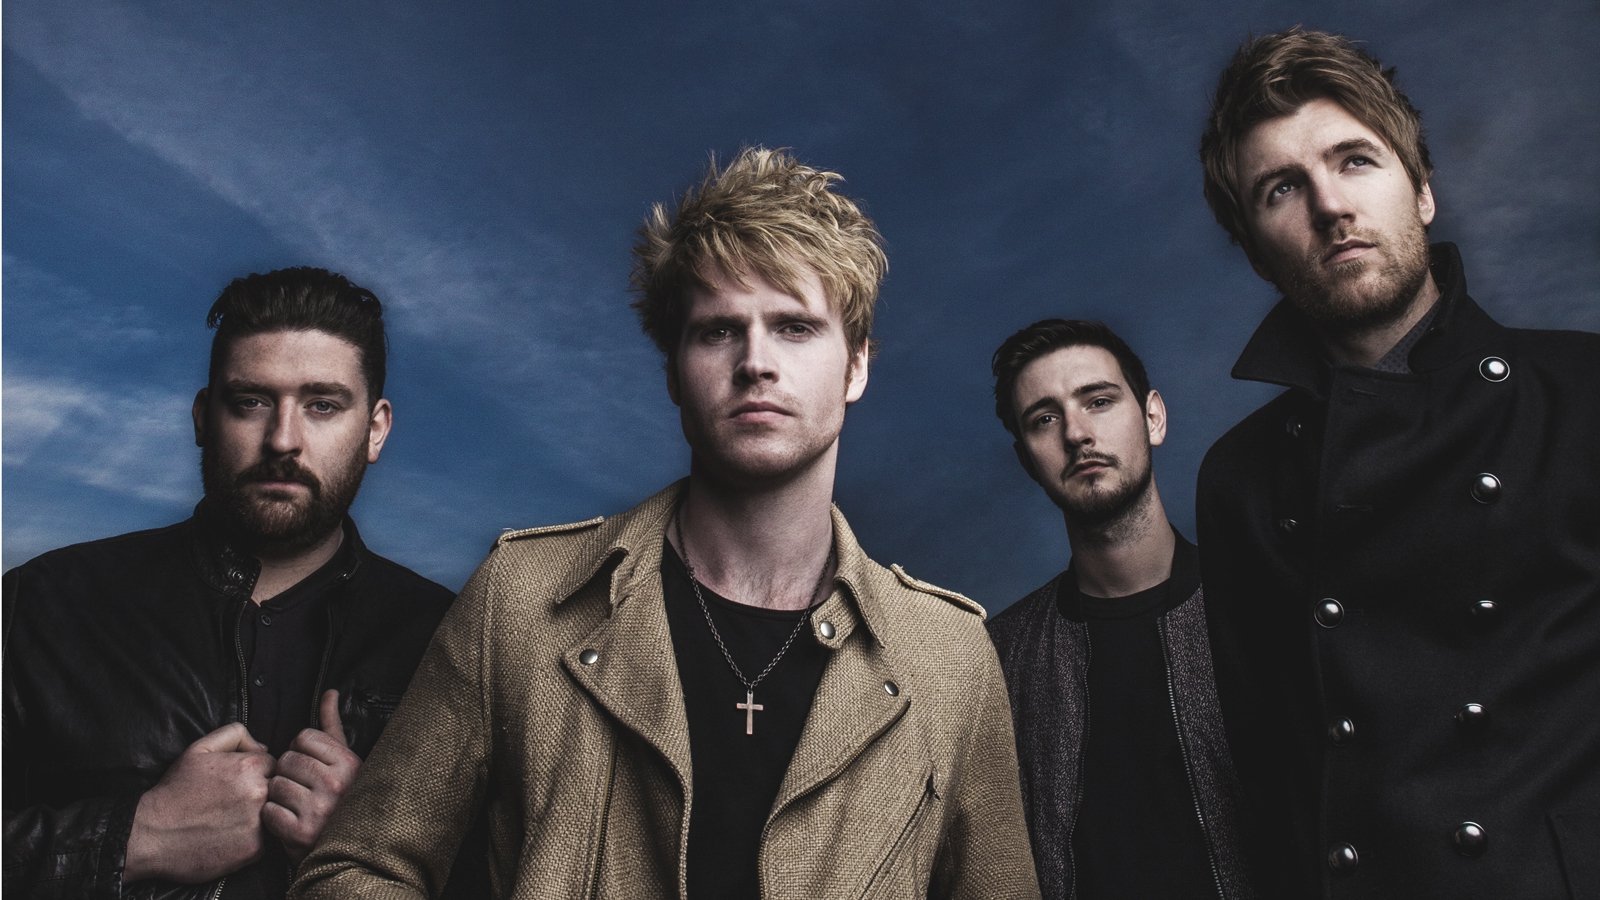 Группа Kodaline. Группа Kodaline 2022. Kodaline "Politics of Living". Концерт Kodaline. Kodaline everything works out in the end